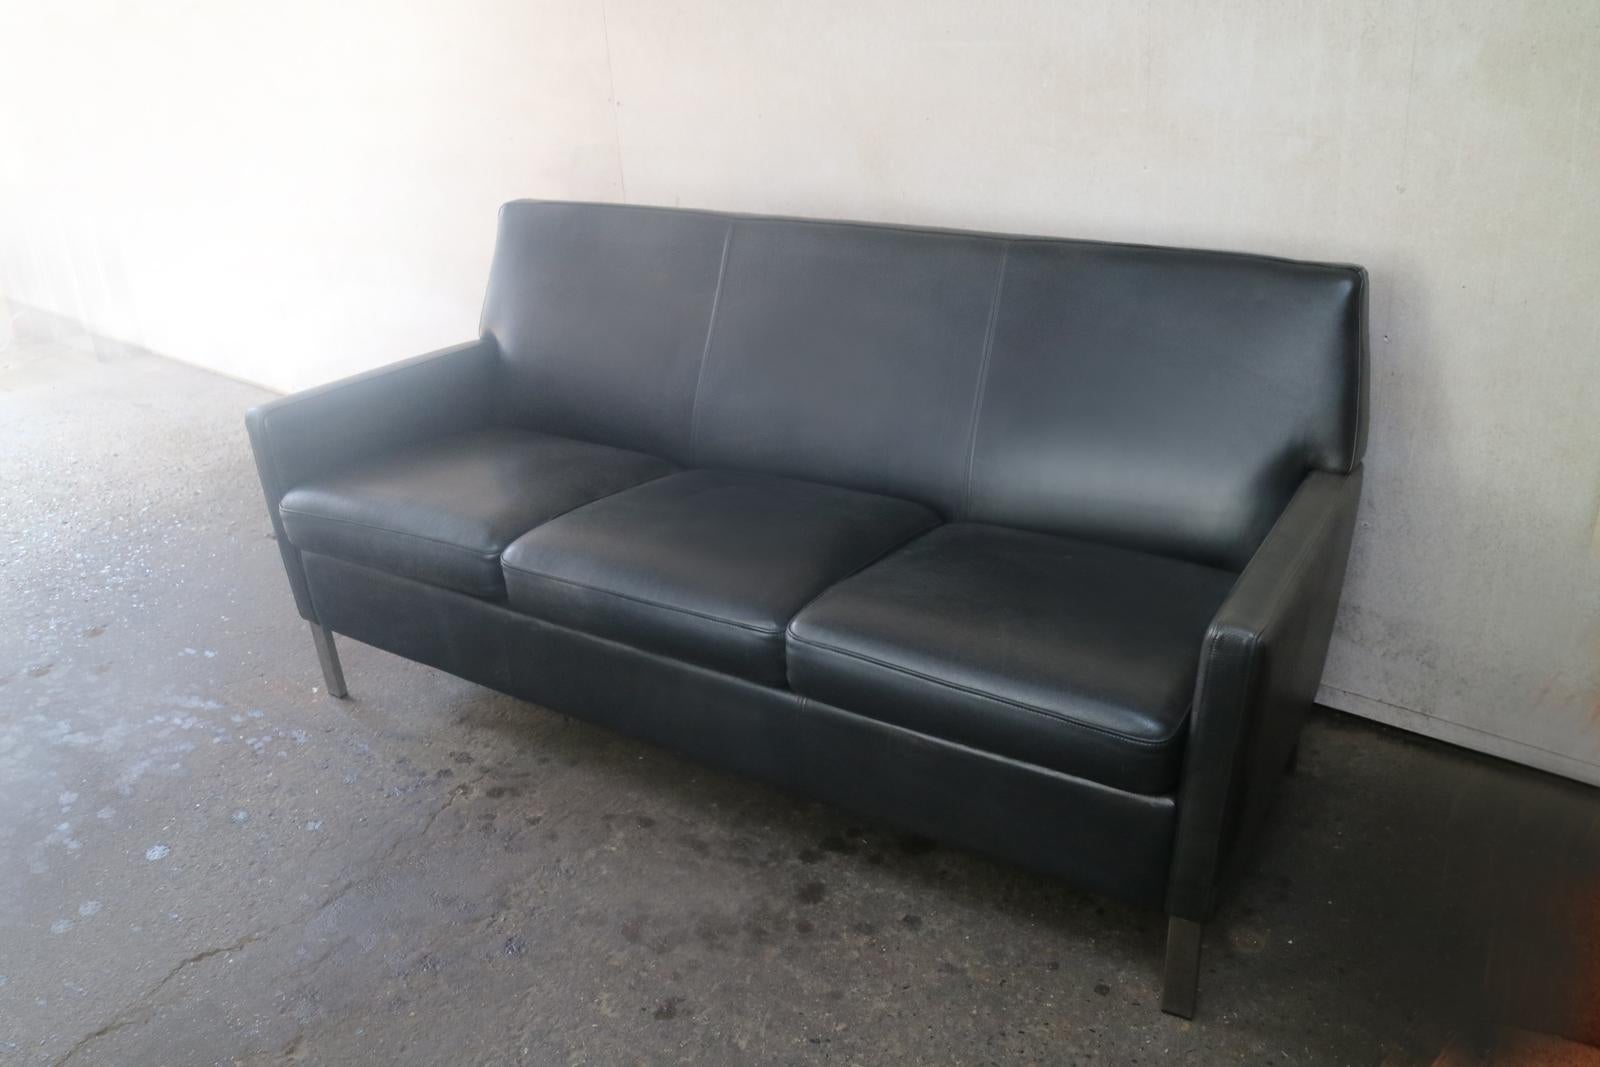 A late 1970s three-seat sofa with original black leather upholstery and brushed steel legs.